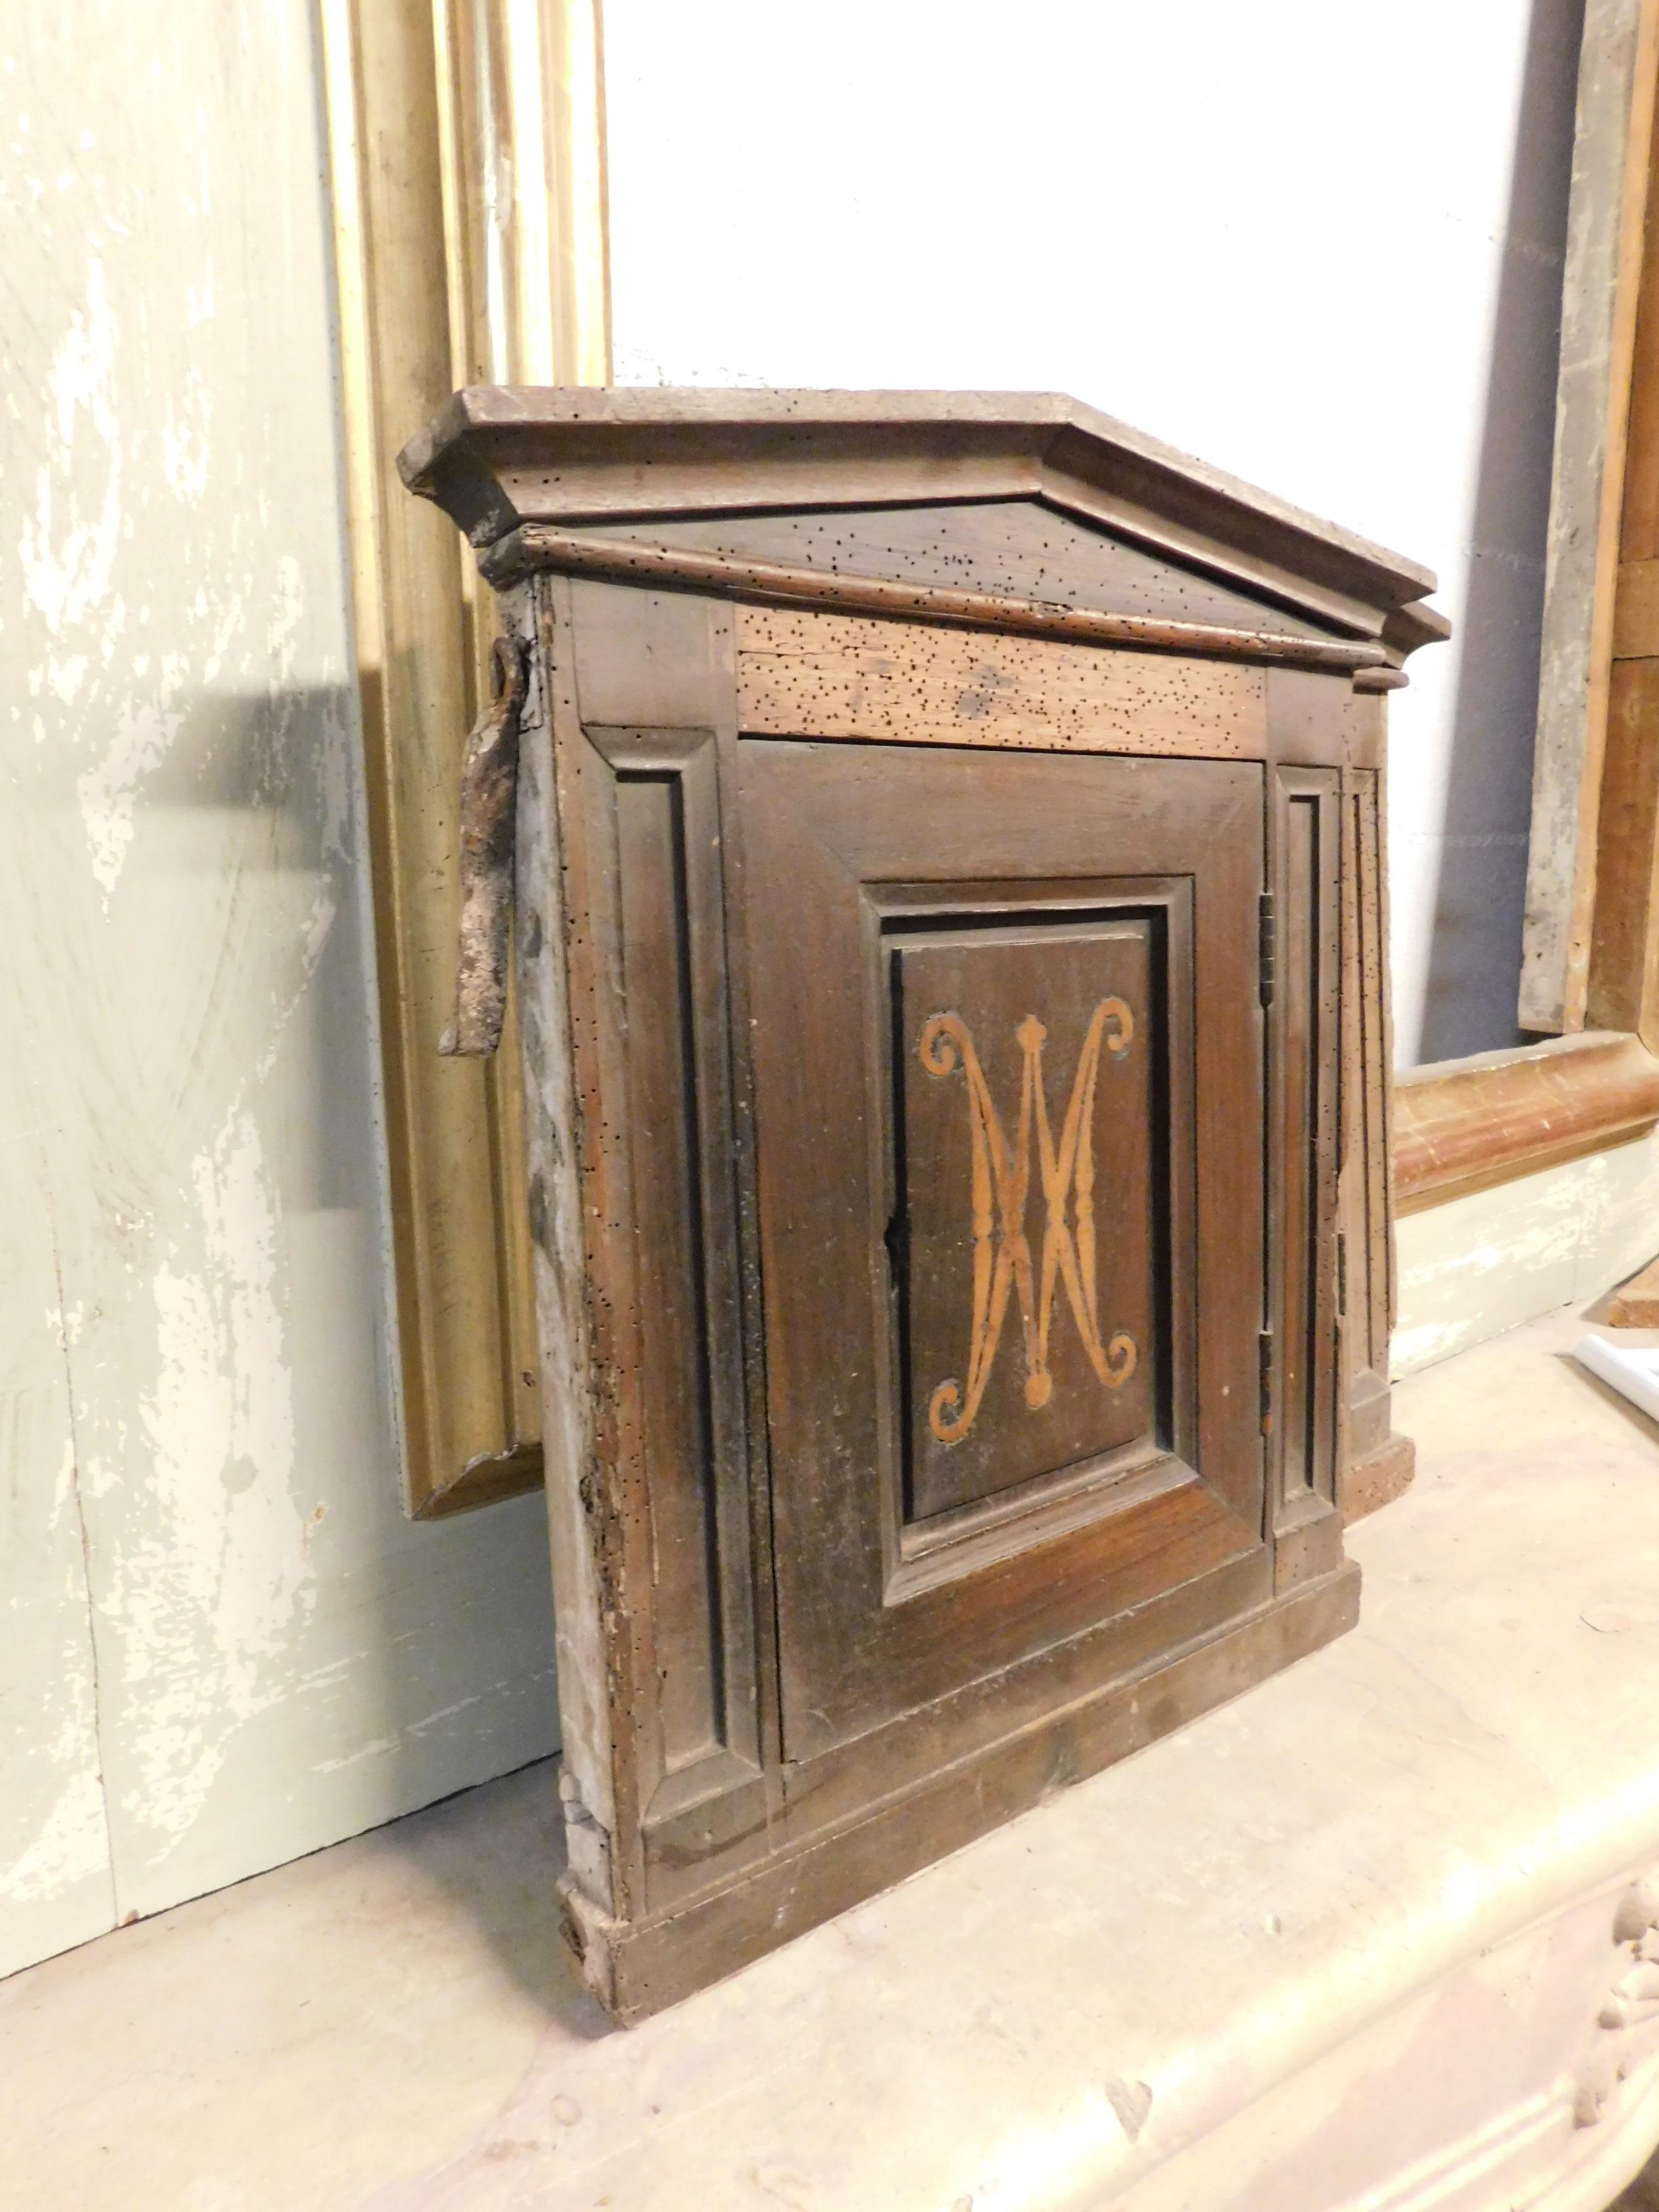 16th century antique pair of wood tabernacle with tympanum and inlays, can become cabinets or cupboards doors.